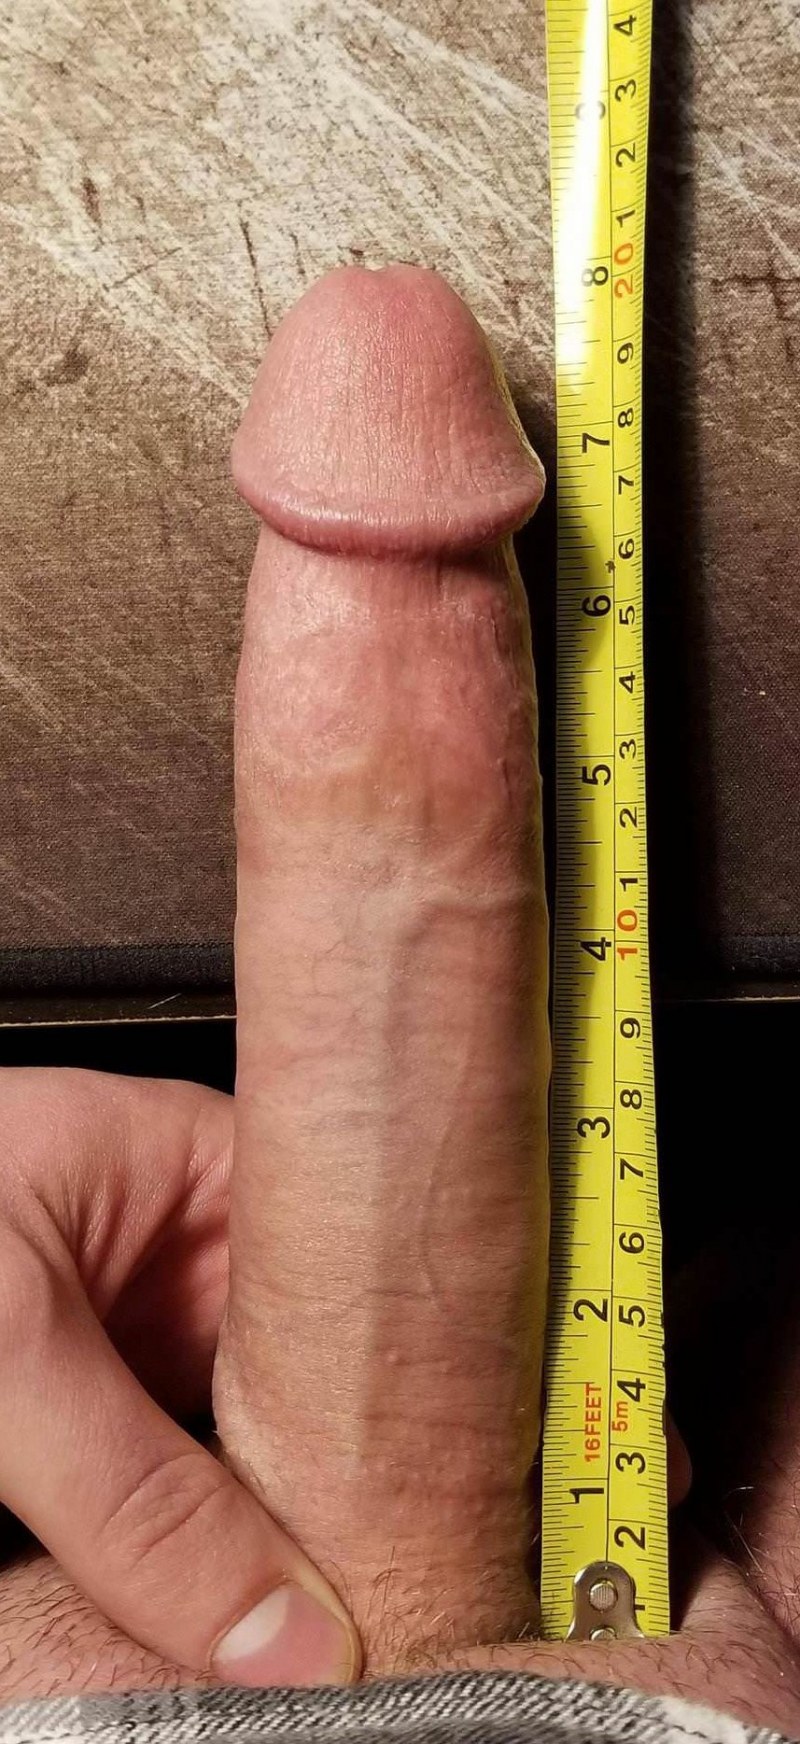 5.5 inches dick